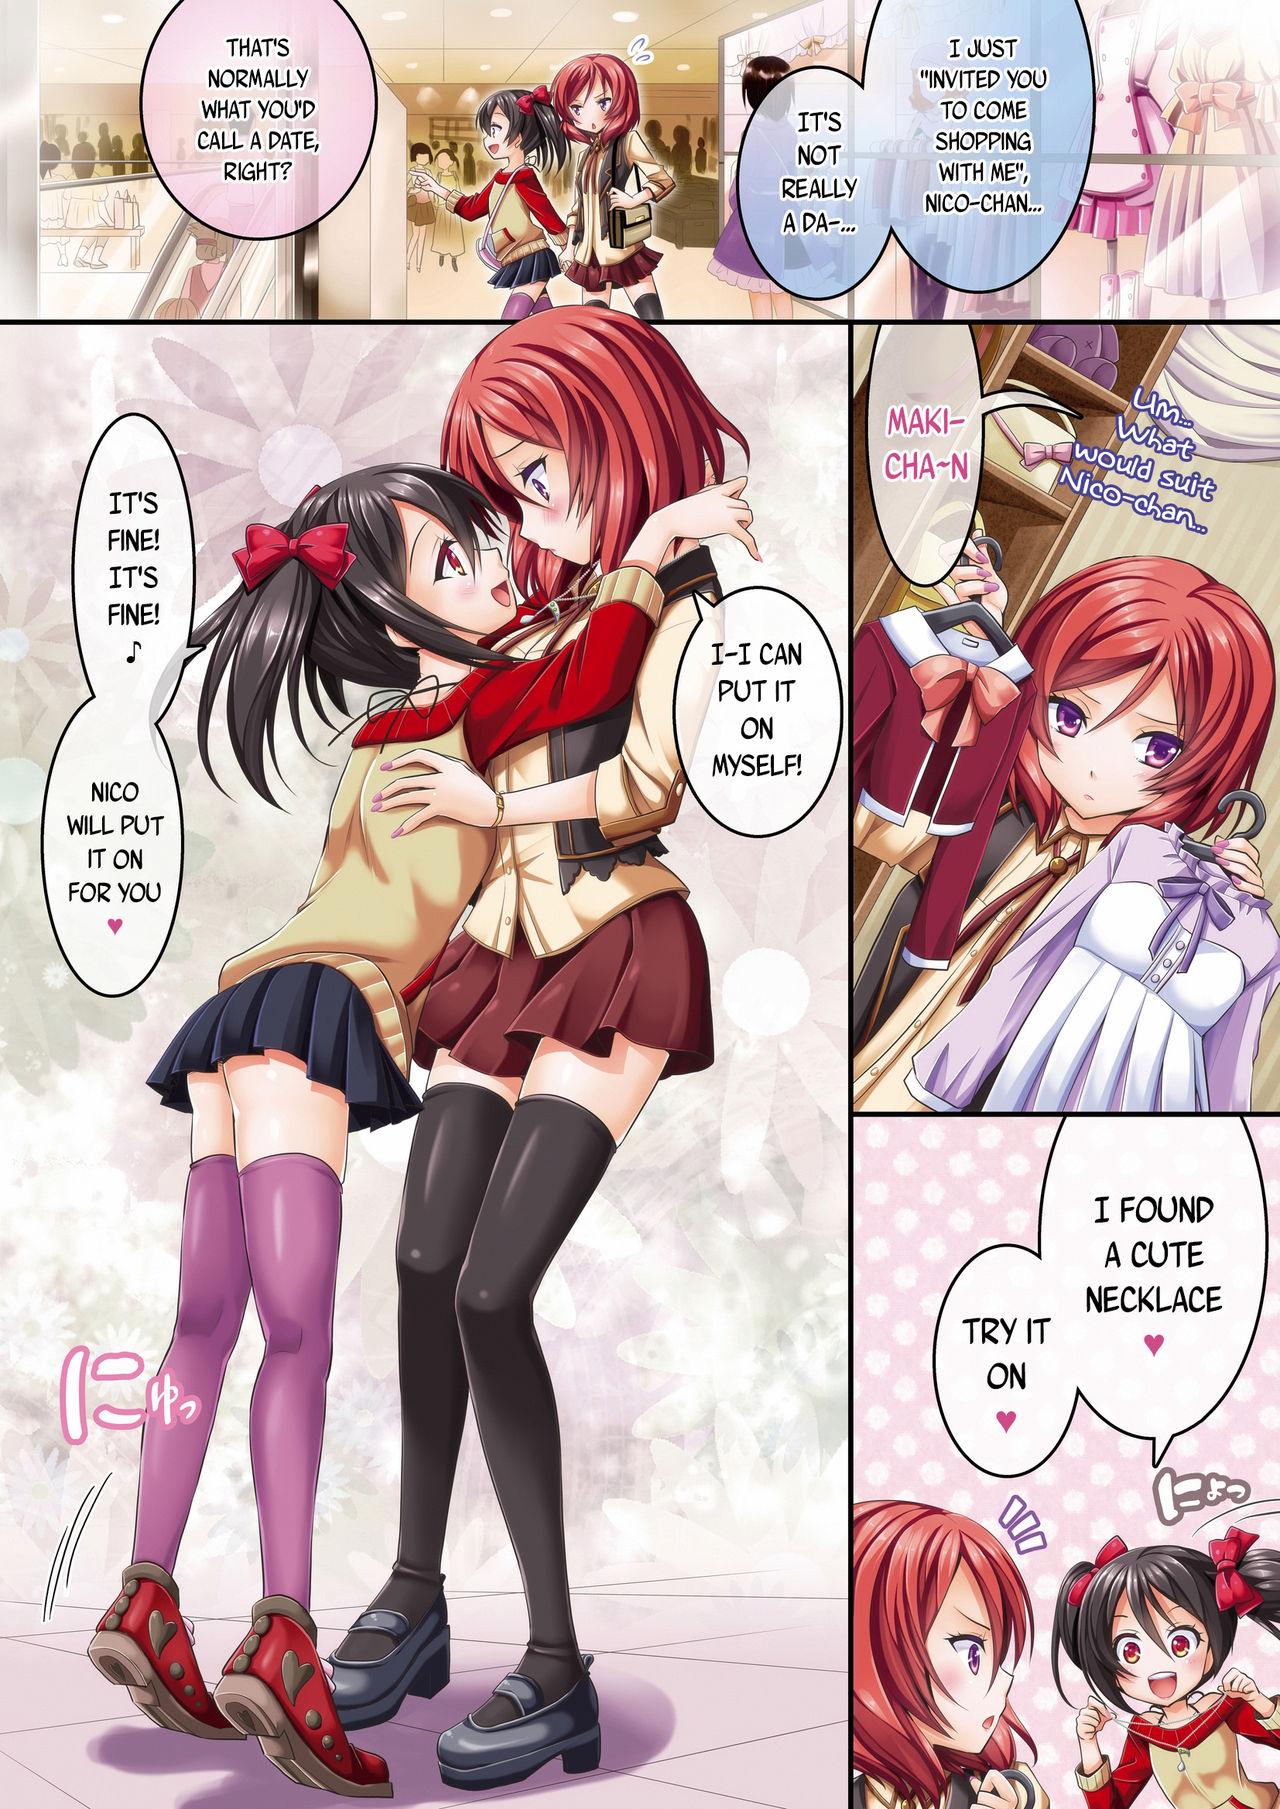 Skinny NorE - Love live Vagina - Page 4